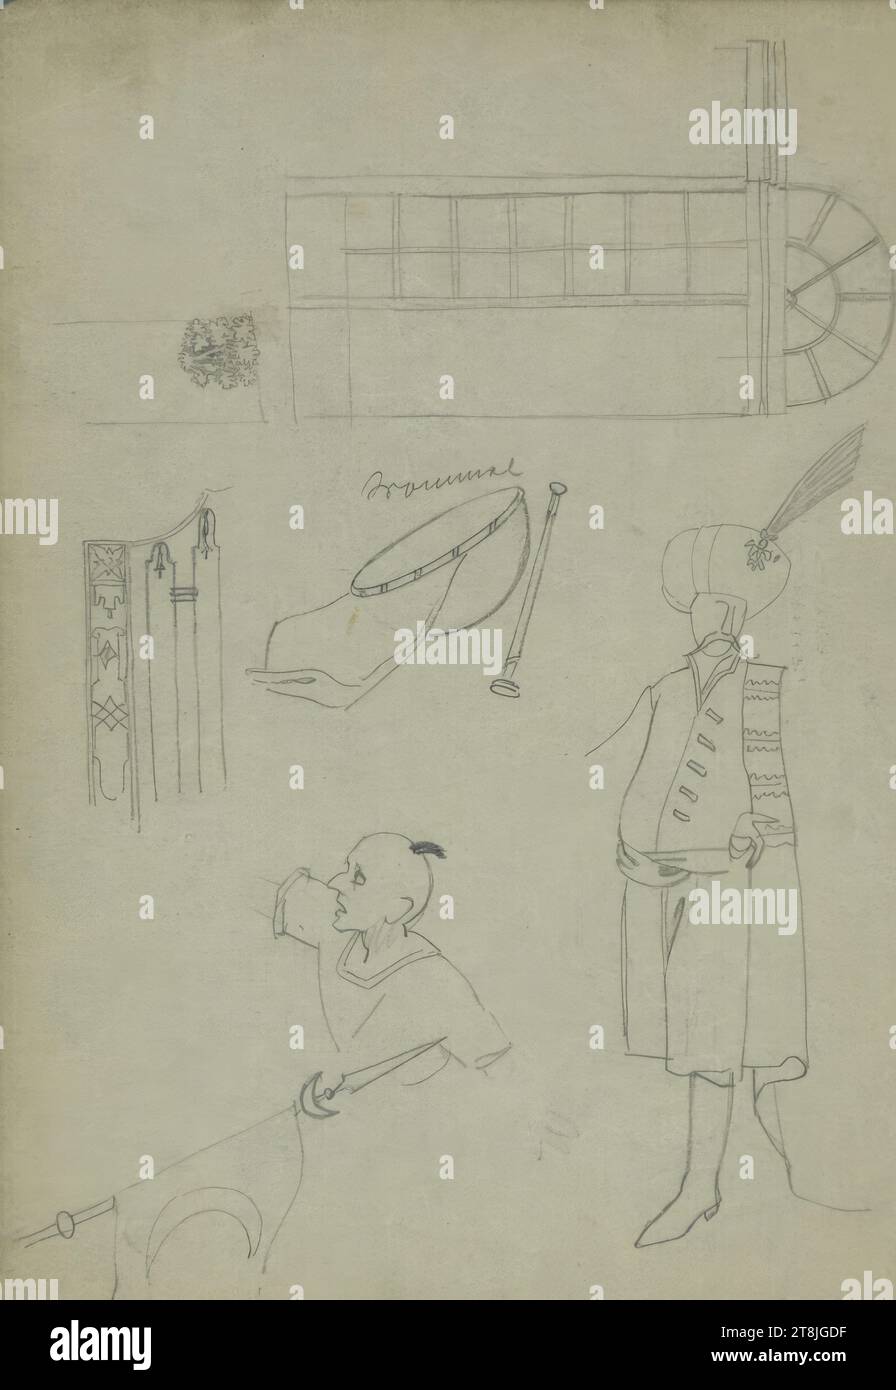 Sketch of building details; Sketch of an Ottoman, a drum, a flag; Partial sketch of a figure, partly upside down, sketchbook Wacik Franz; 64 paginated pages, so-called Prinz Eugen sketchbook, Franz Wacik, Vienna 1883 - 1938 Vienna, 1915, drawing, pencil, sheet: 21.3 x 16.5 cm, M.M. 'Drum', pencil, Austria Stock Photo